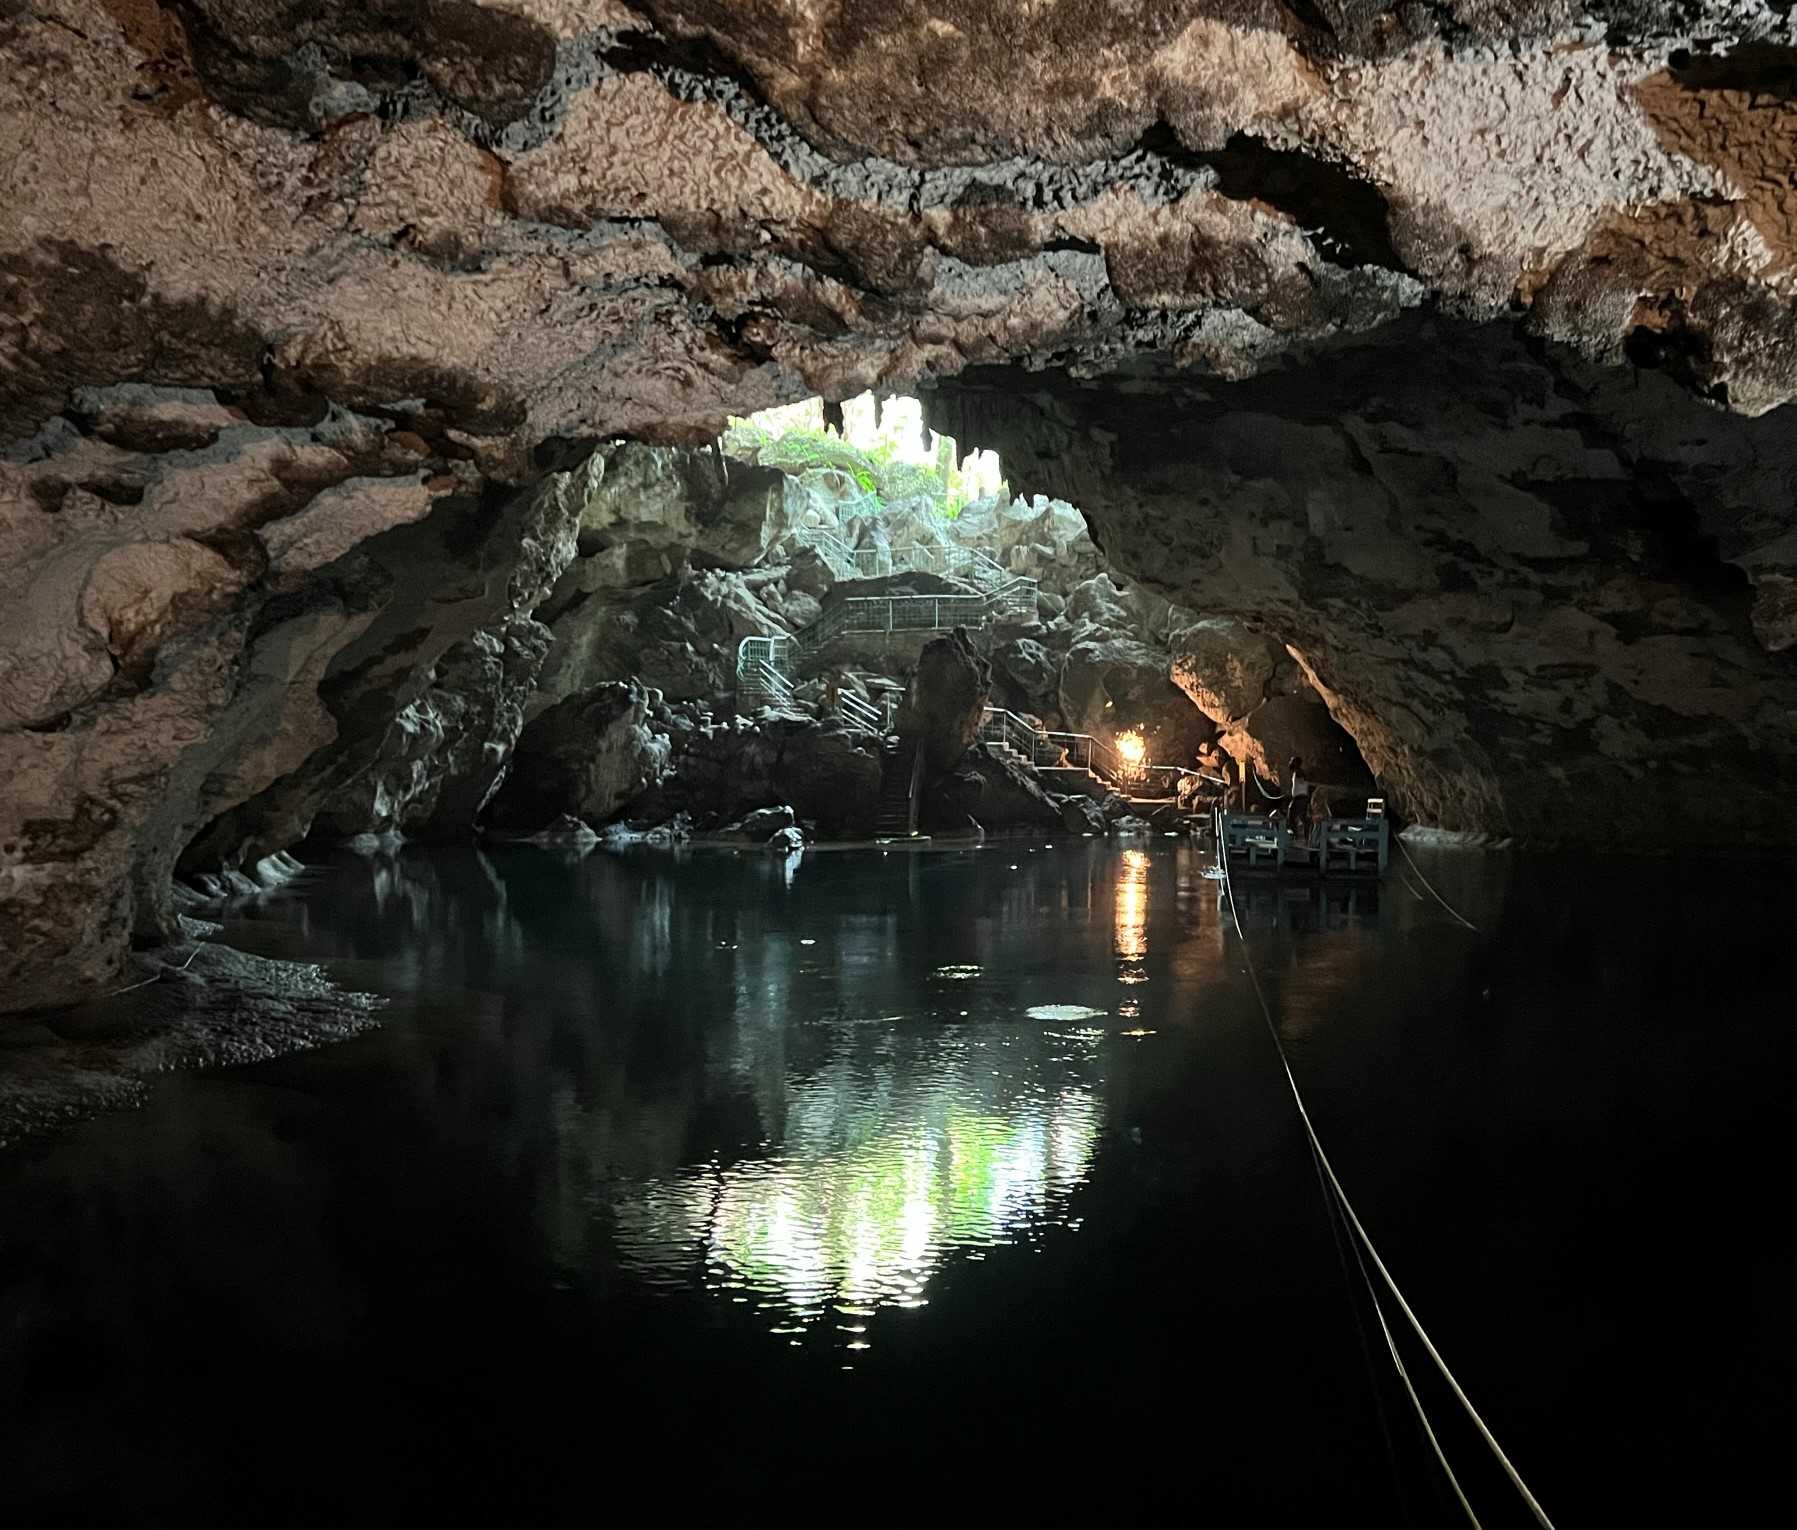 Parque Nacional los Tres Ojos (National Park of the Three Eyes) is a nature reserve and open-air limestone cave system in Santo Domingo, Dominican Republic. Visitors can ride between overlooks on a raft across one of the underground lakes.